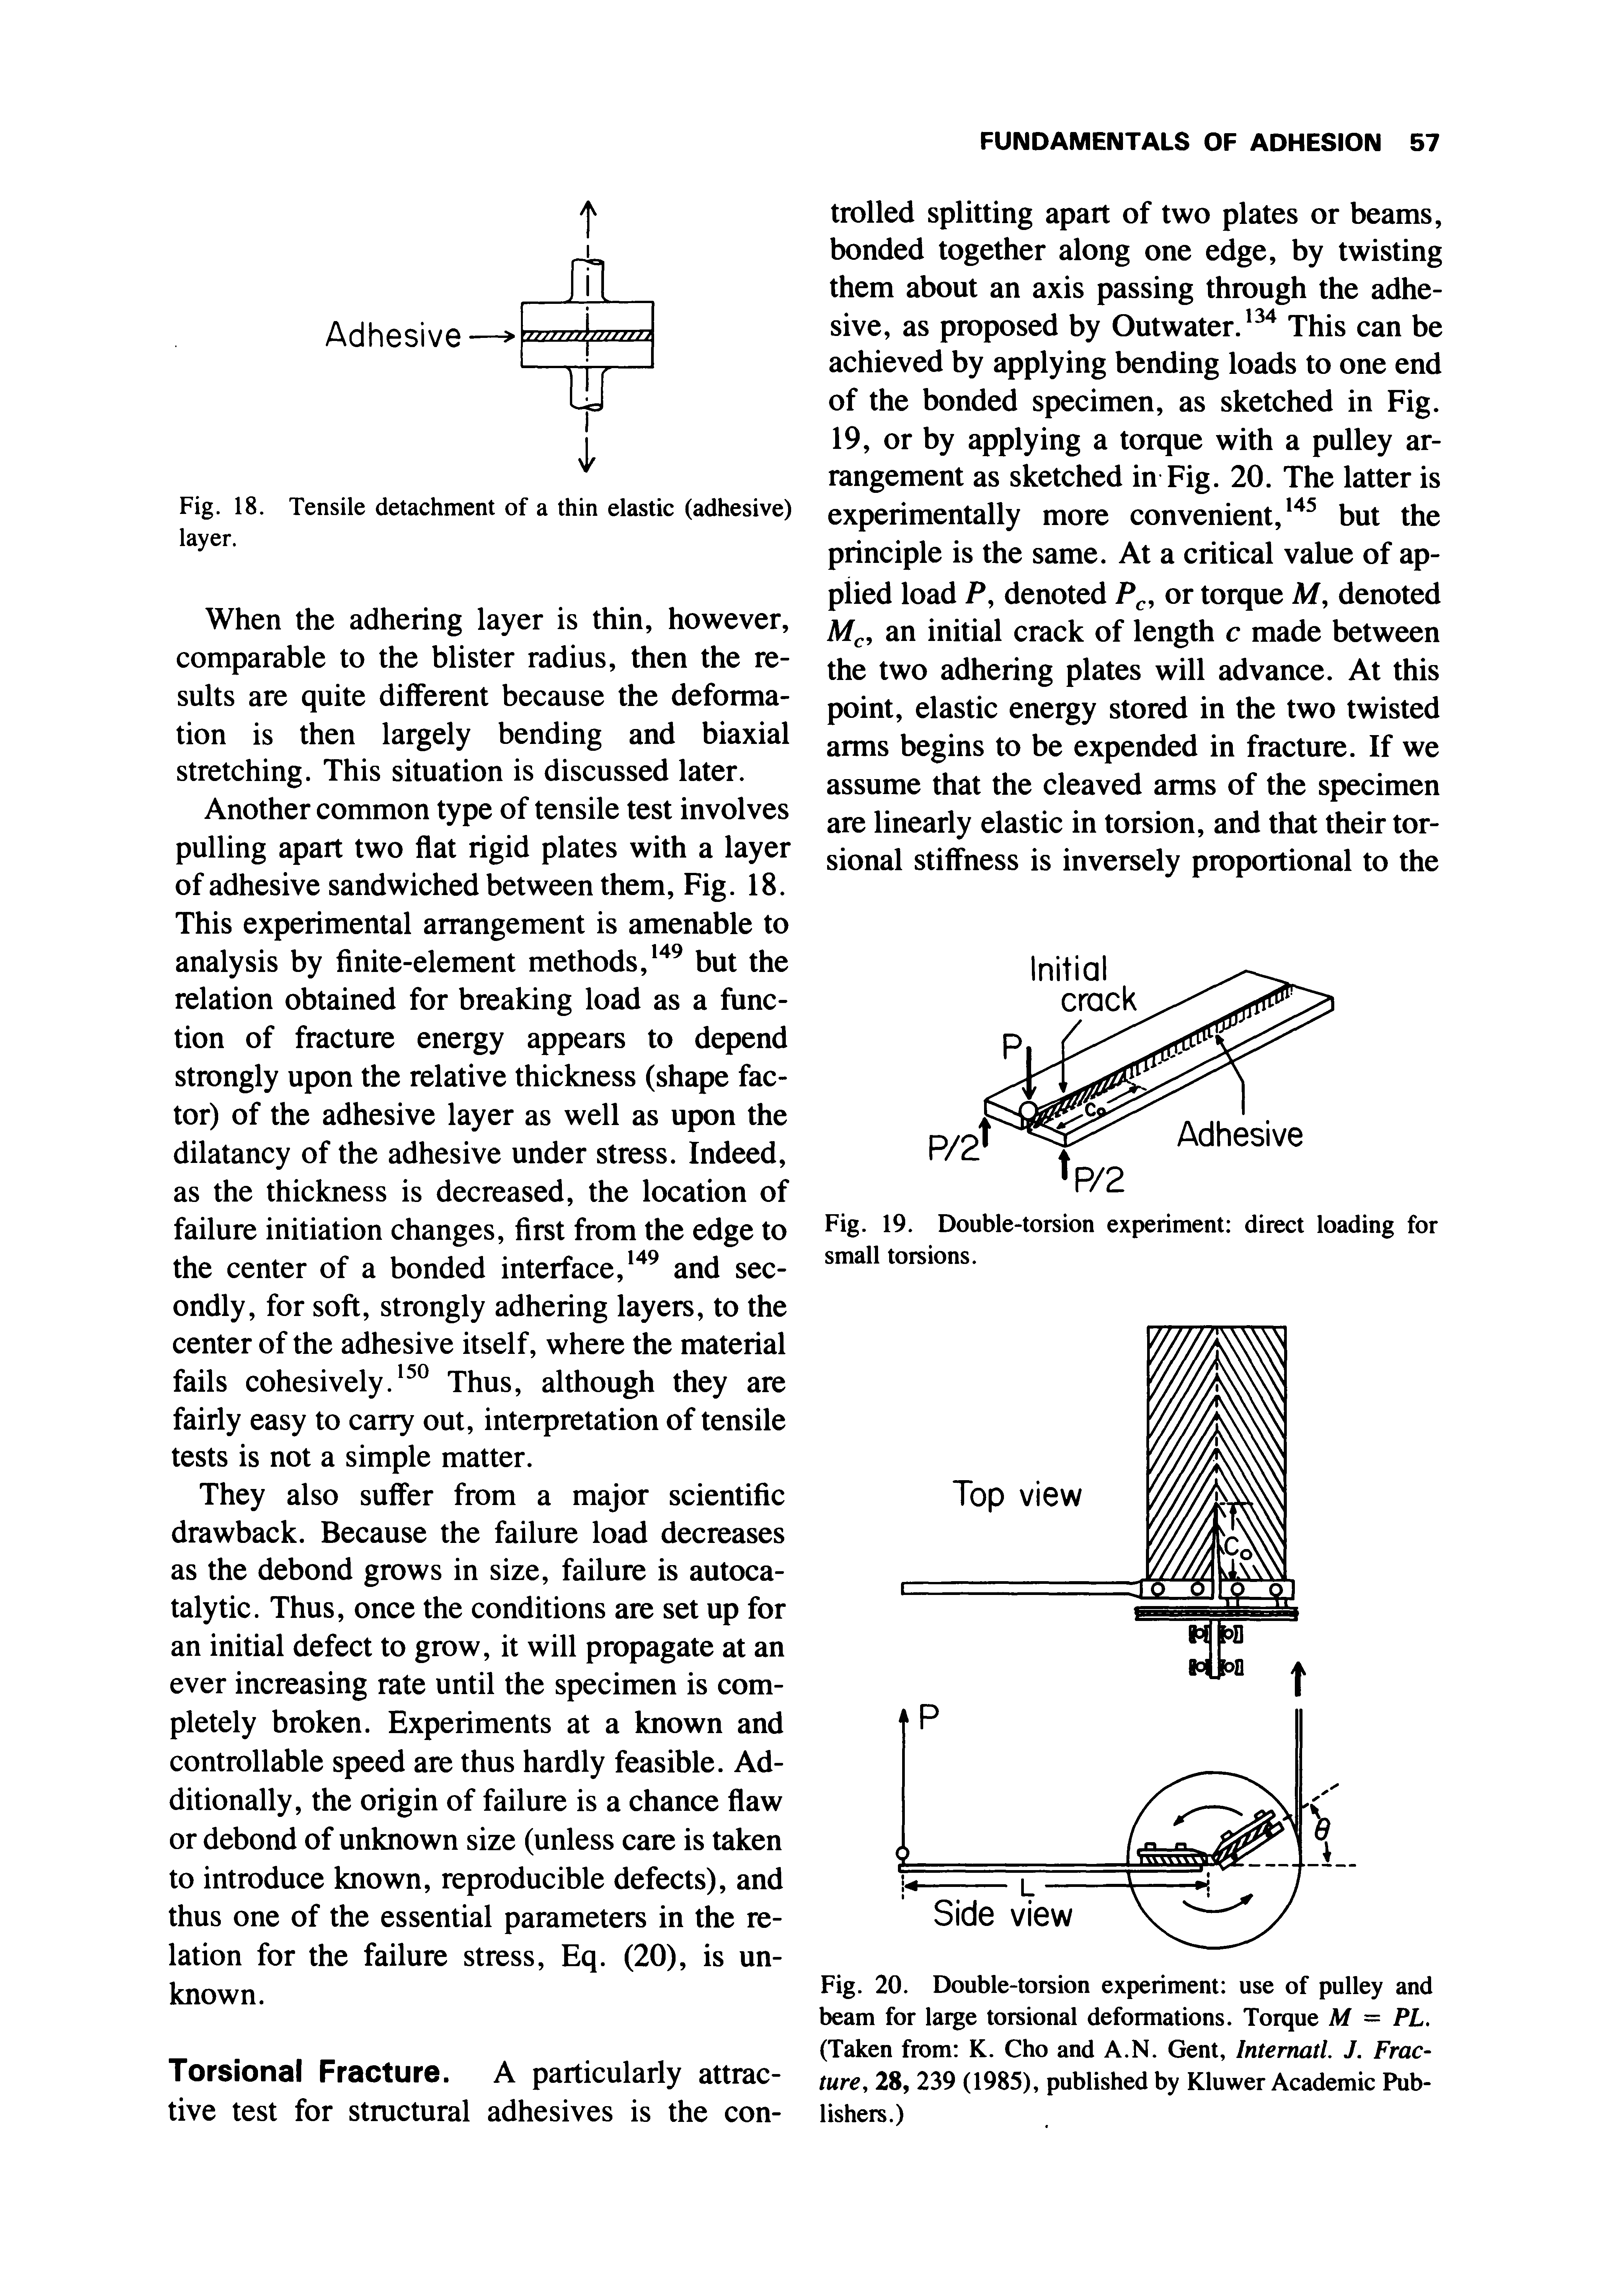 Fig. 19. Double-torsion experiment direct loading for small torsions.